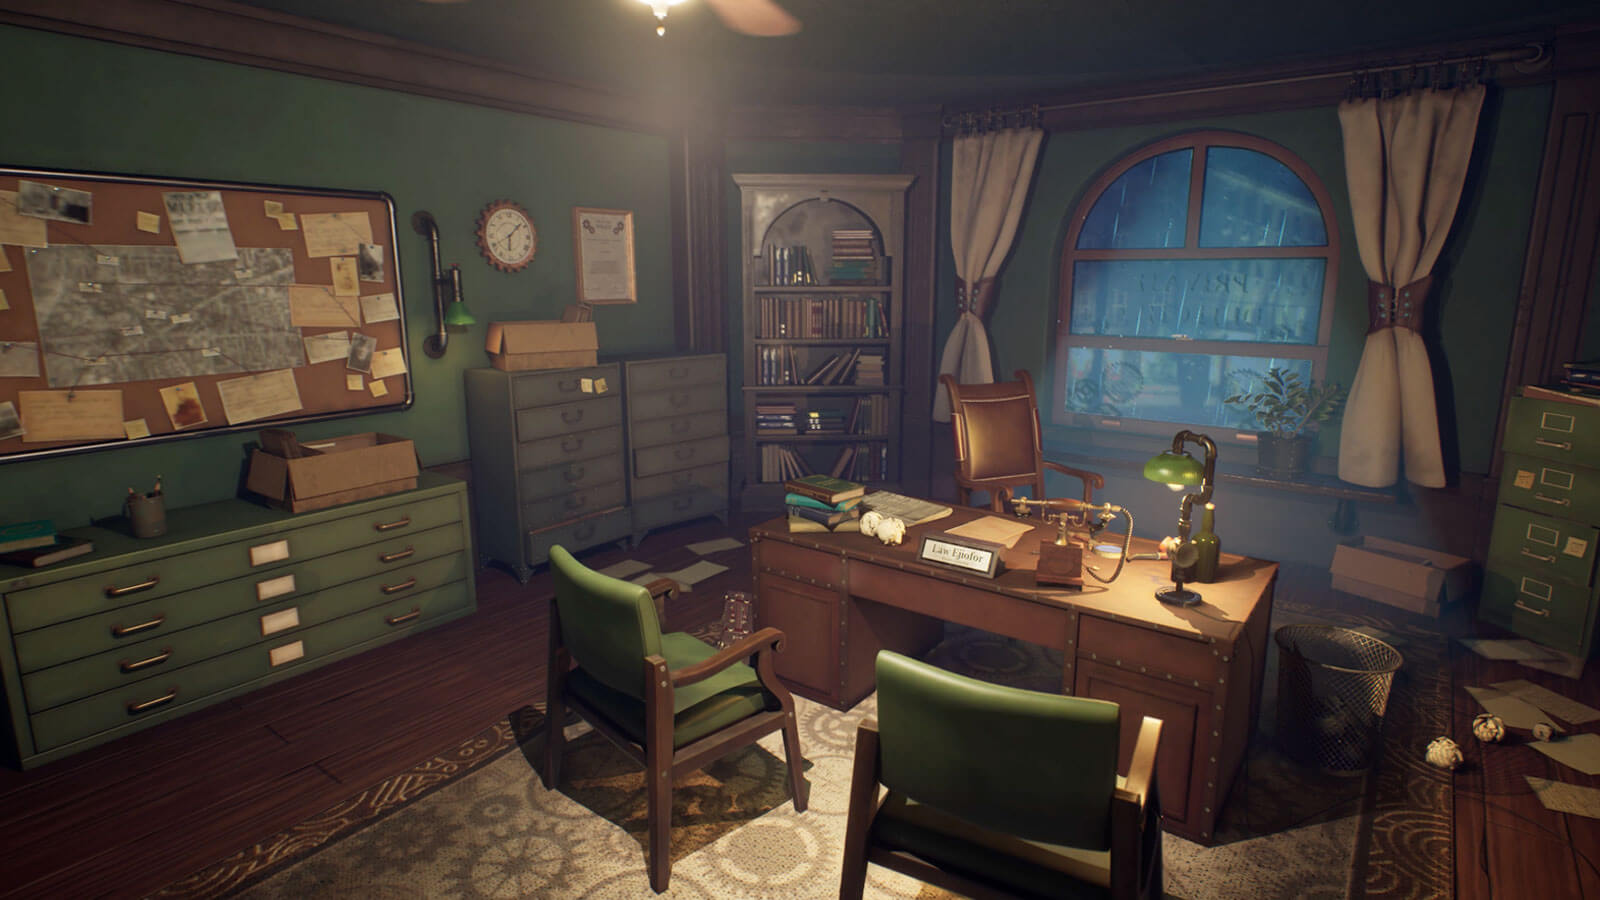 Angled view of a detective's office and desk